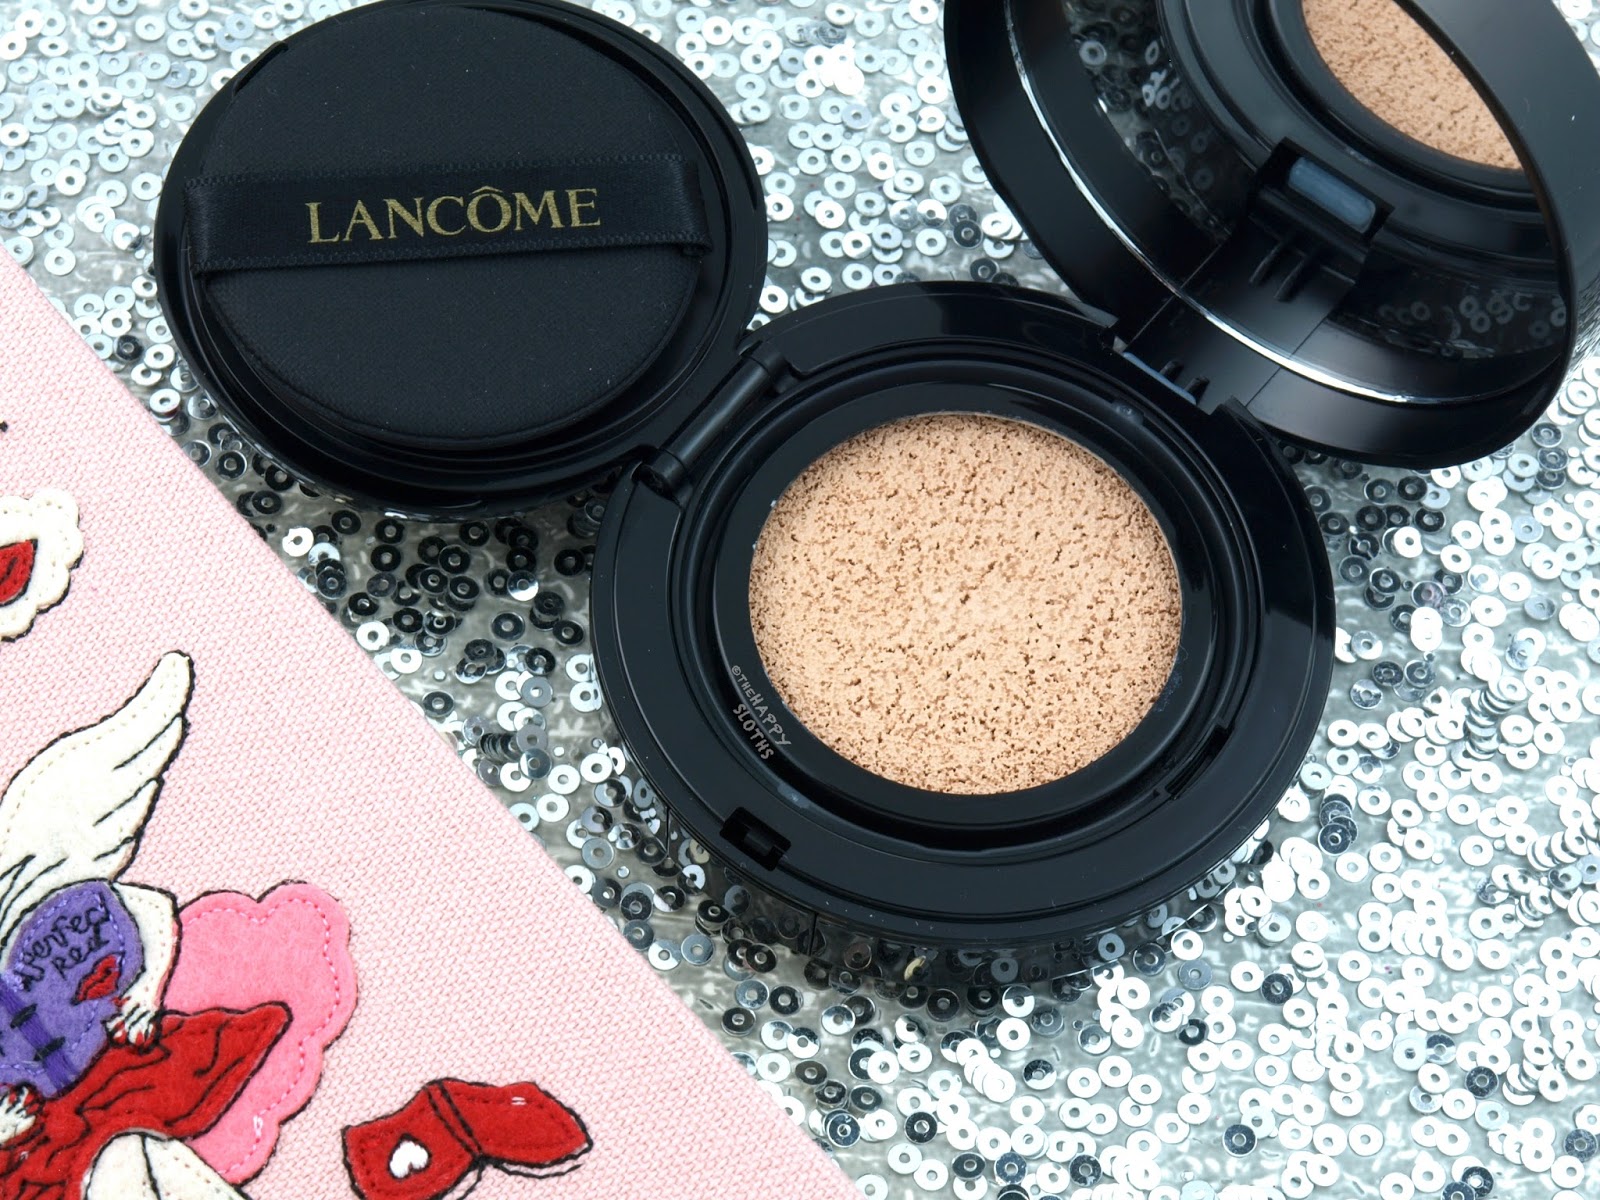 Lancome x Olympia Le-Tan | Cushion Highlighter: Swatches and Review